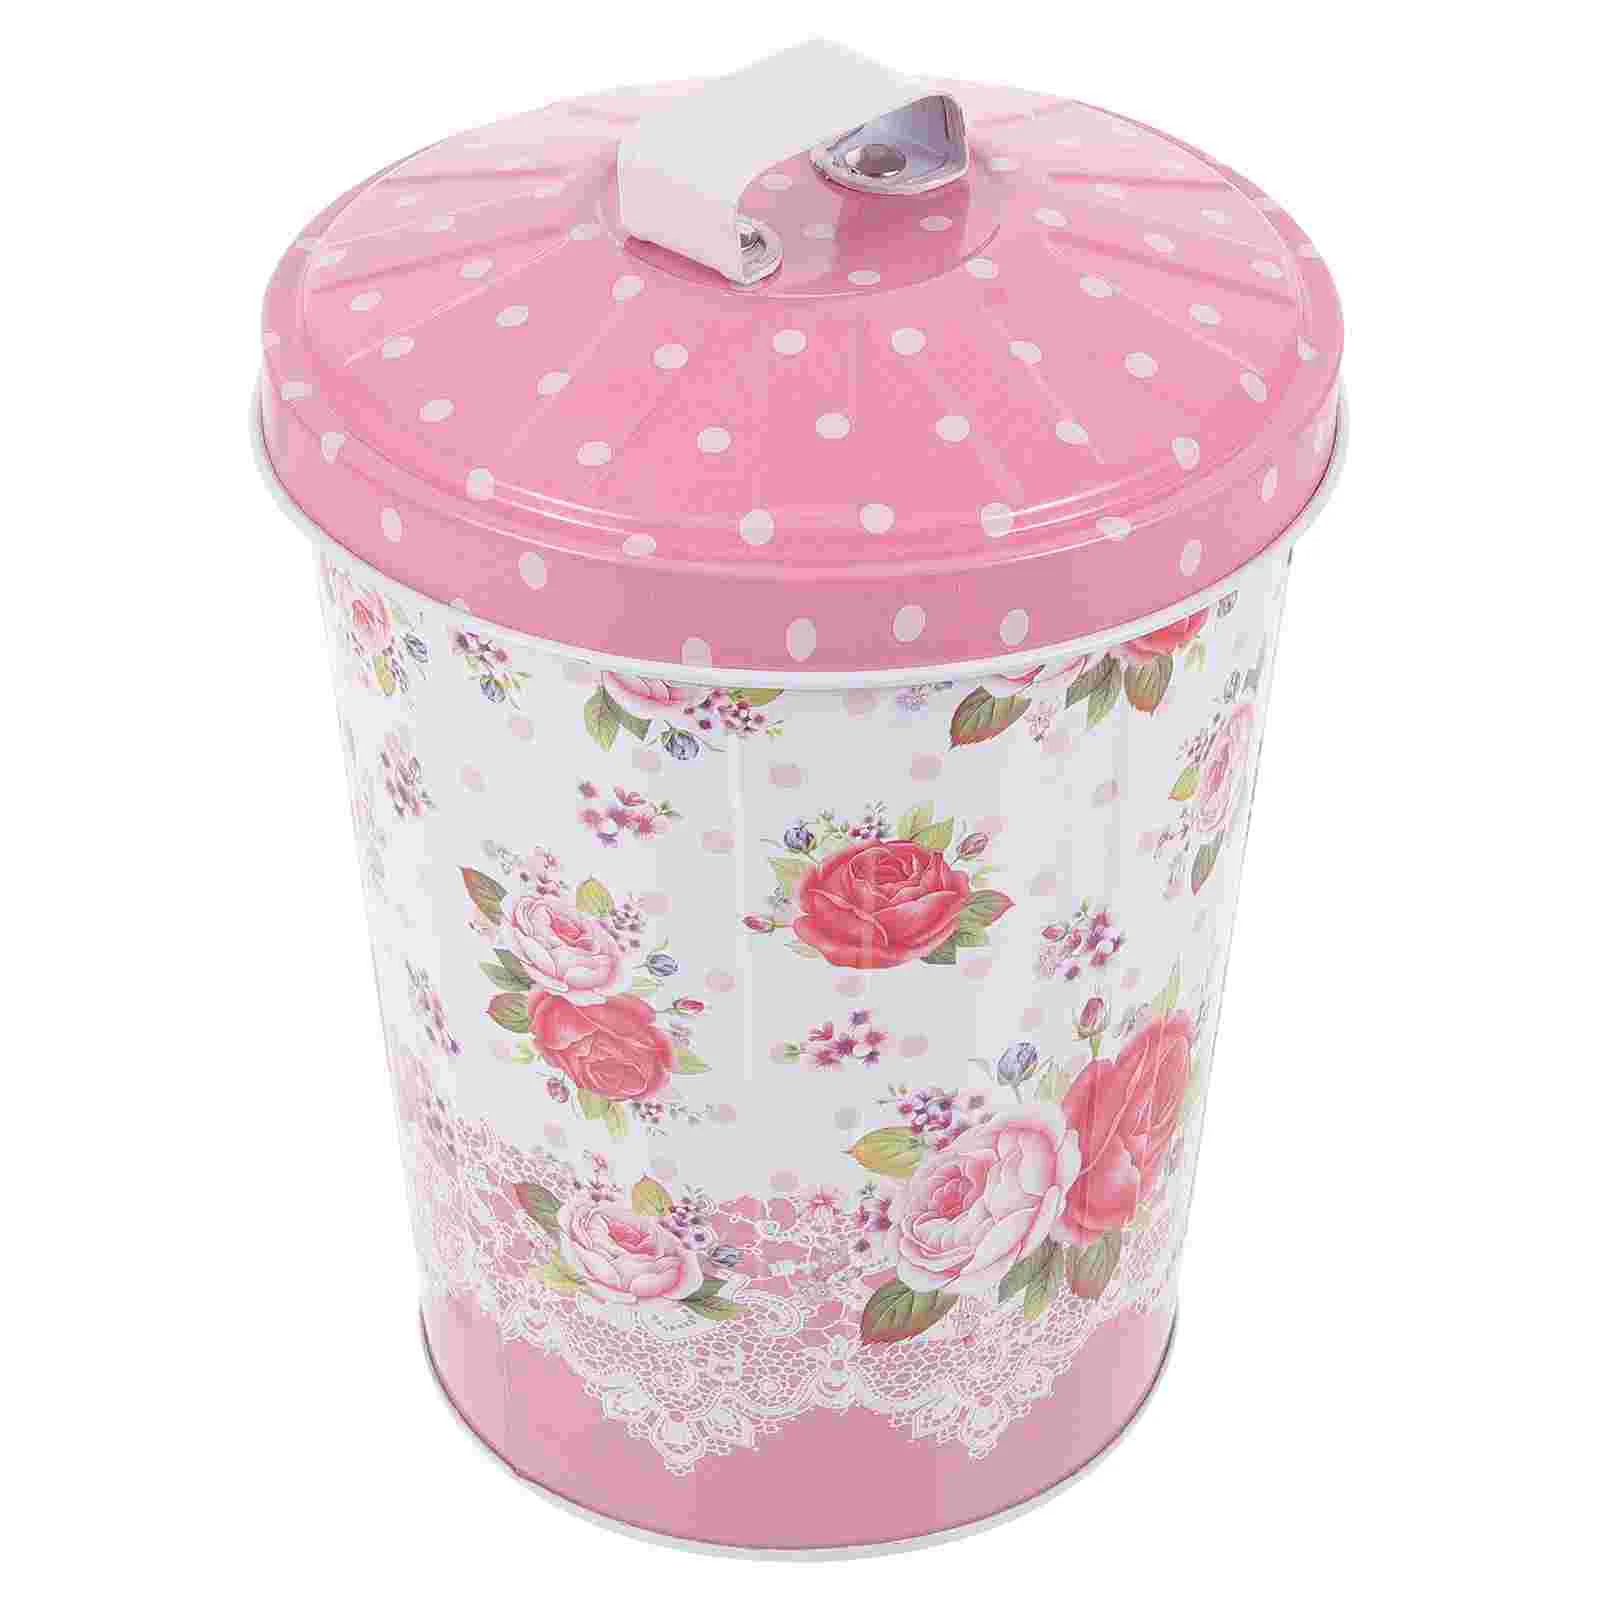 

Tinplate Storage Bucket Candy Box Wide Mouth Jars Gift Cookie Tins Party Favor Packaging Lids Holiday